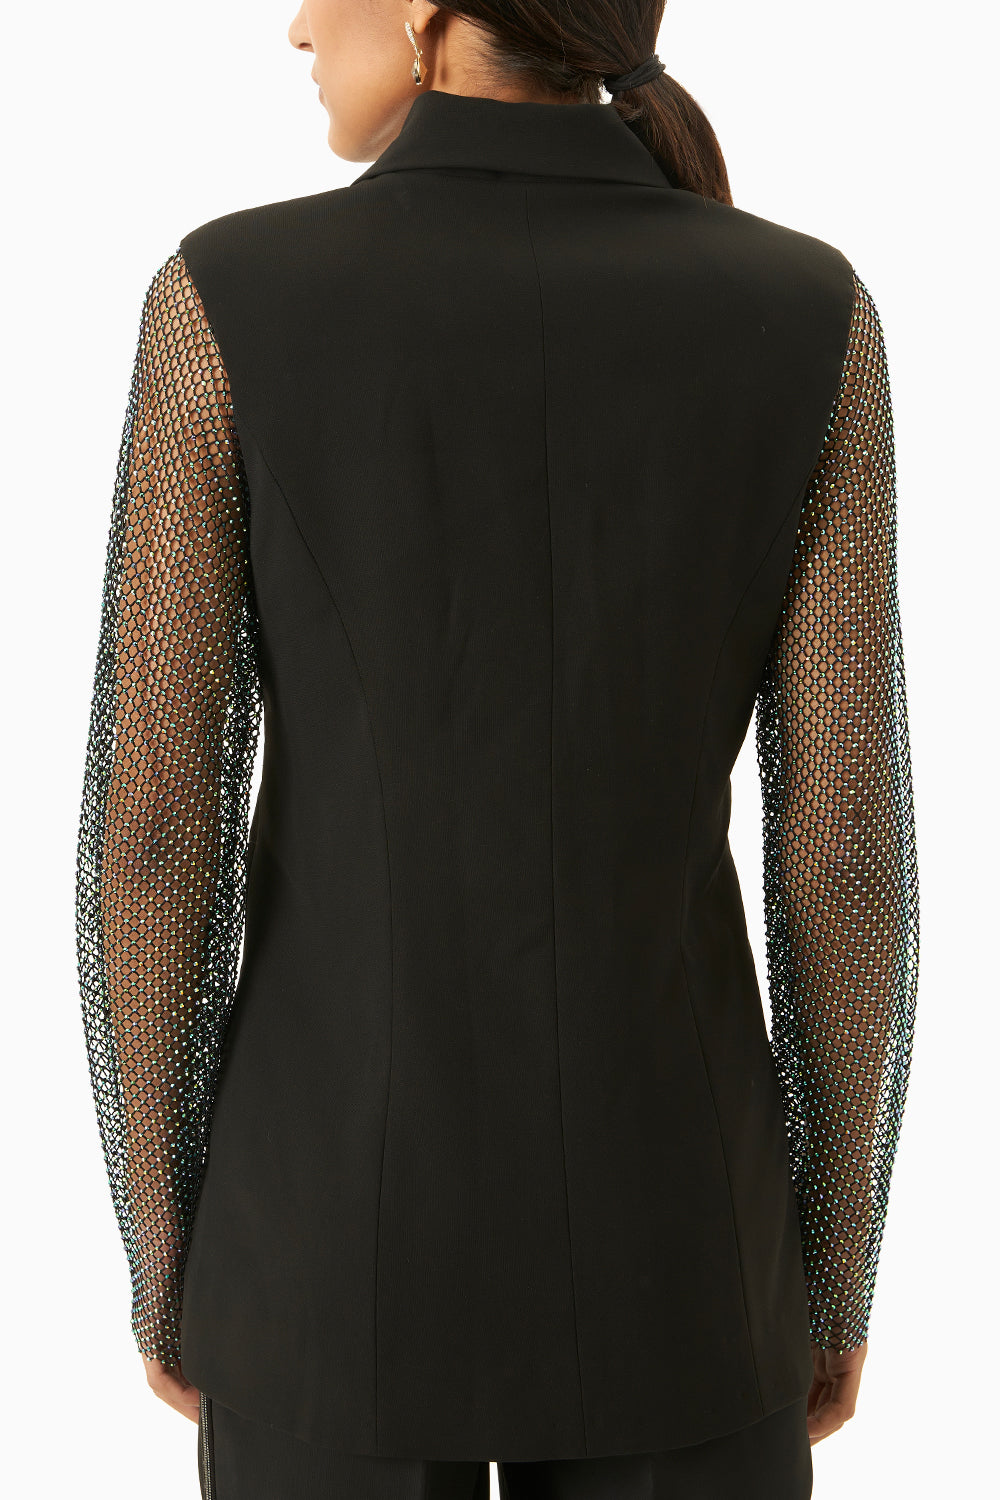 Black Blazer with Crystal mesh lace